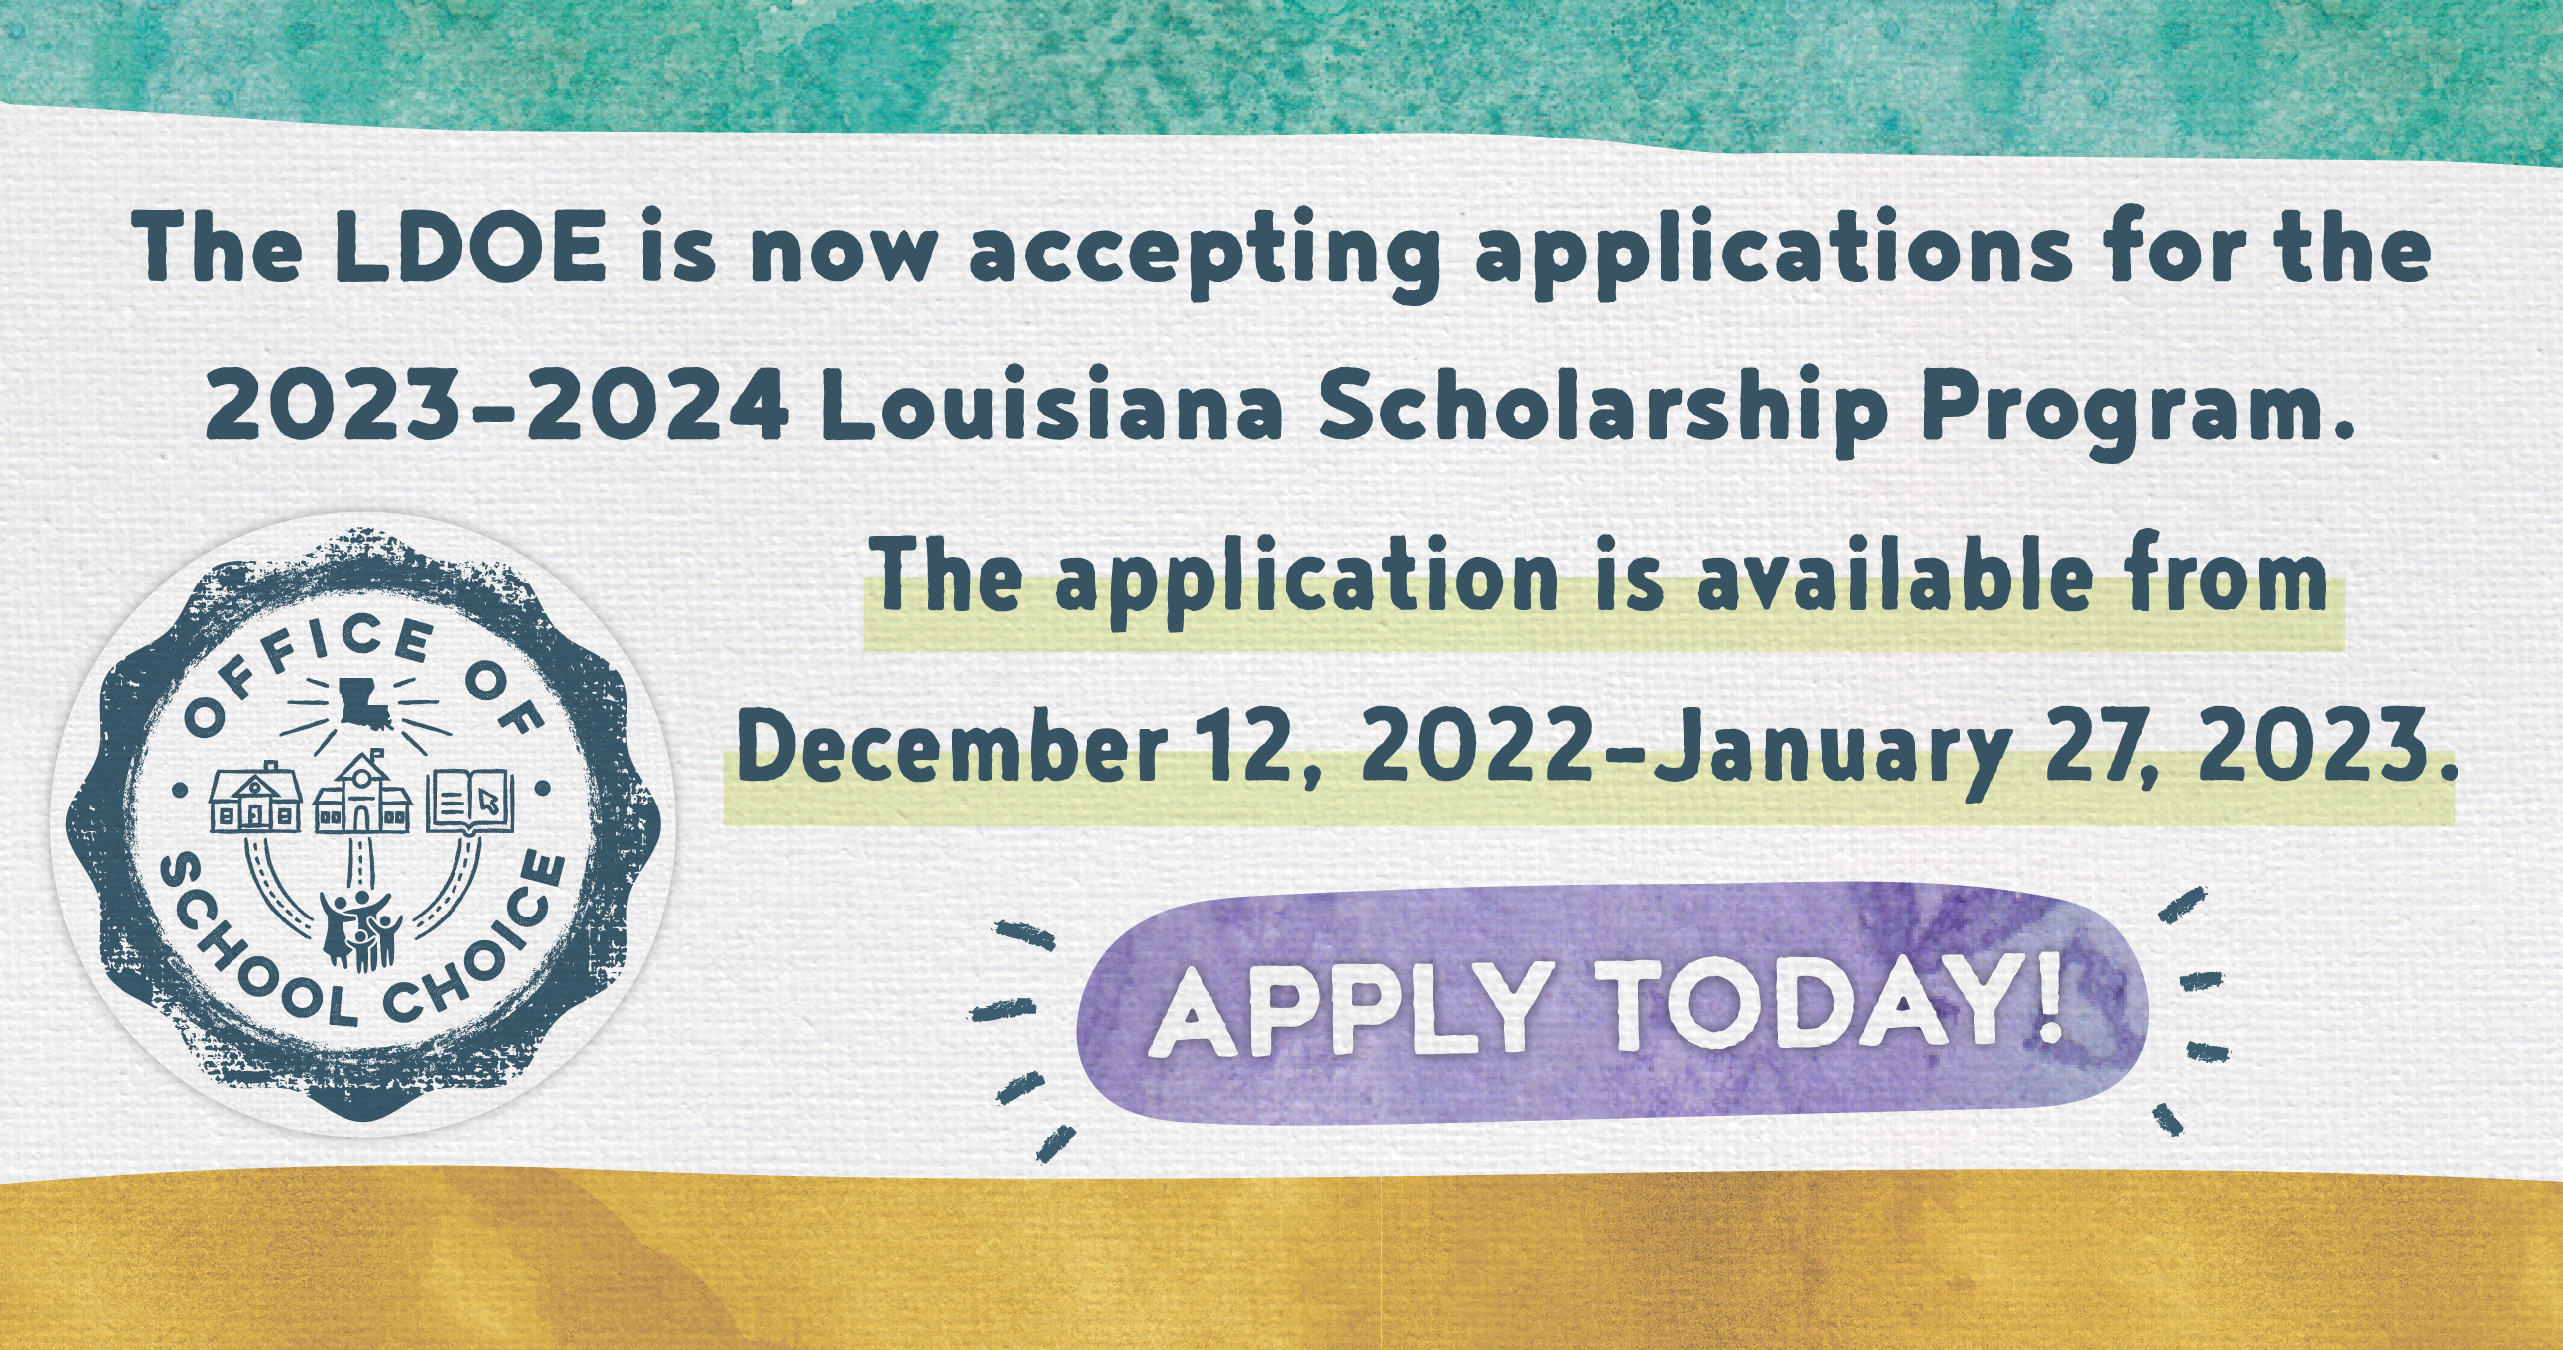 The LDOE is now accepting applications for the2023-2024 Louisiana Scholarship Program. The application is available fromDecember 12, 2022–January 27, 2023. Apply today!